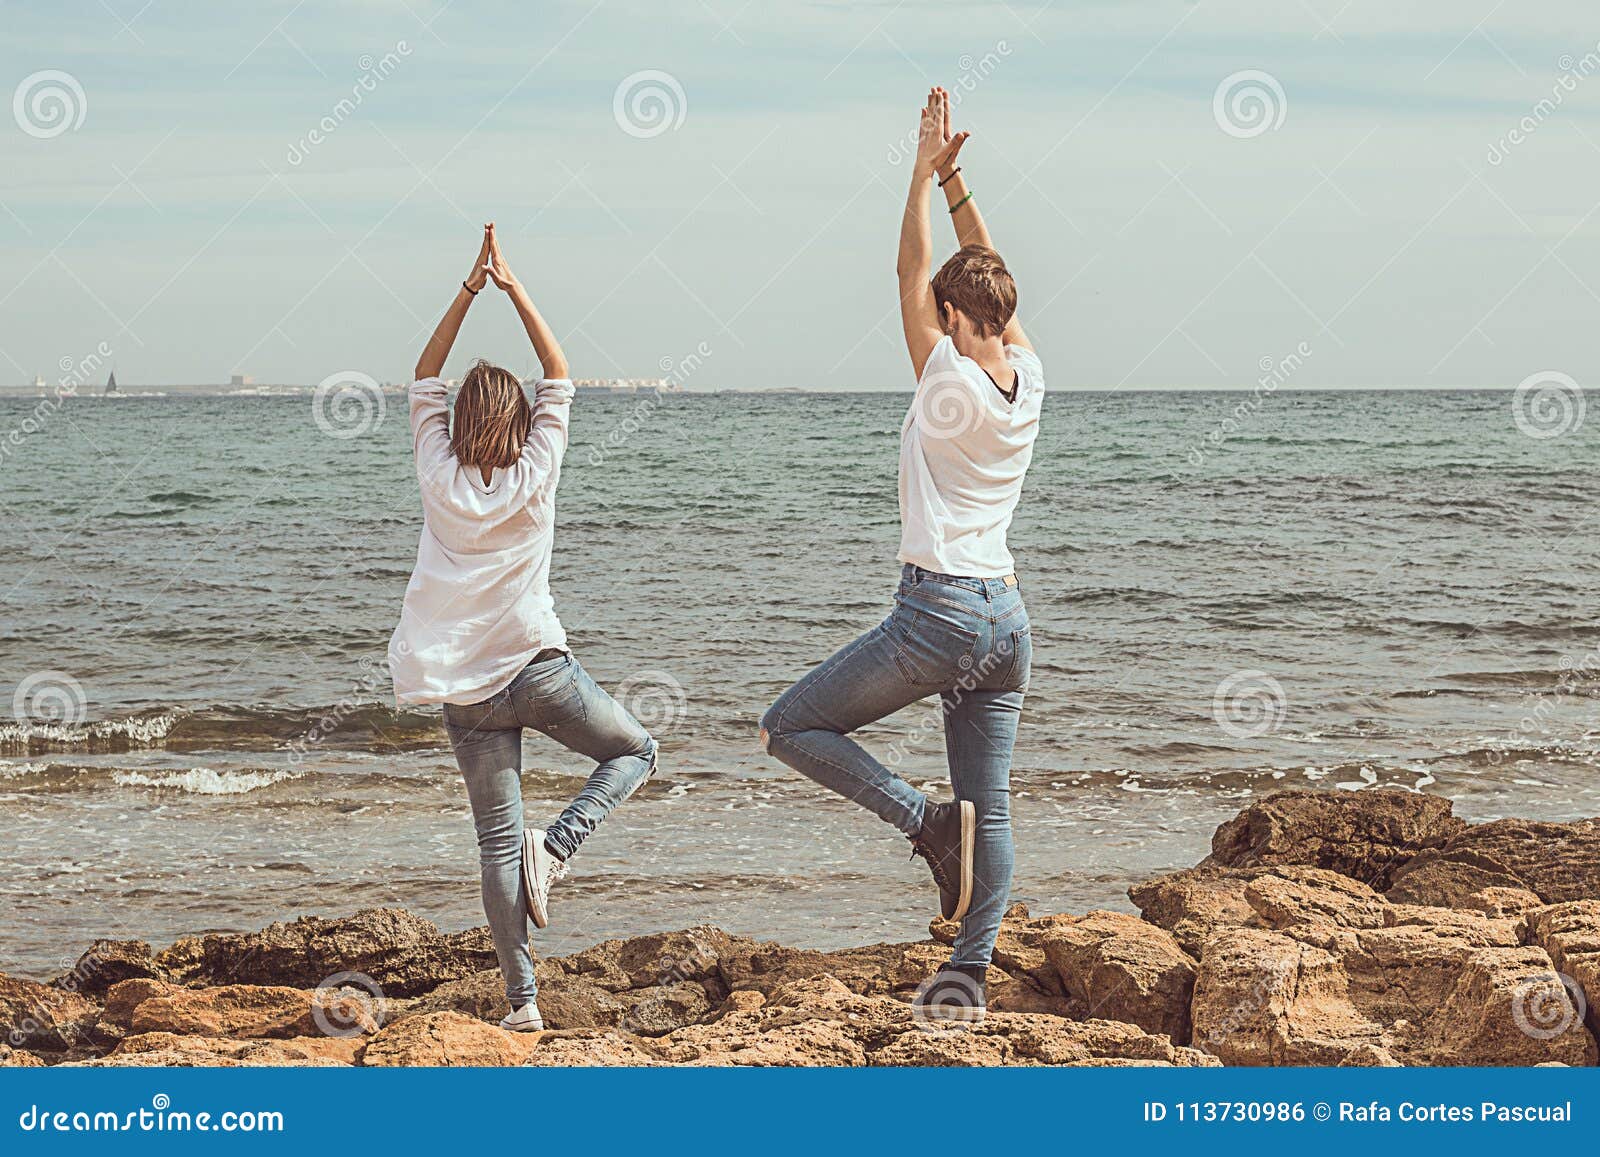 Woman sea yoga. Two happy women practicing yoga on the beach with ocean and  rock mountains. Motivation and inspirational fit and exercising. Healthy  lifestyle outdoors in nature, fitness concept. by panophotograph Vectors